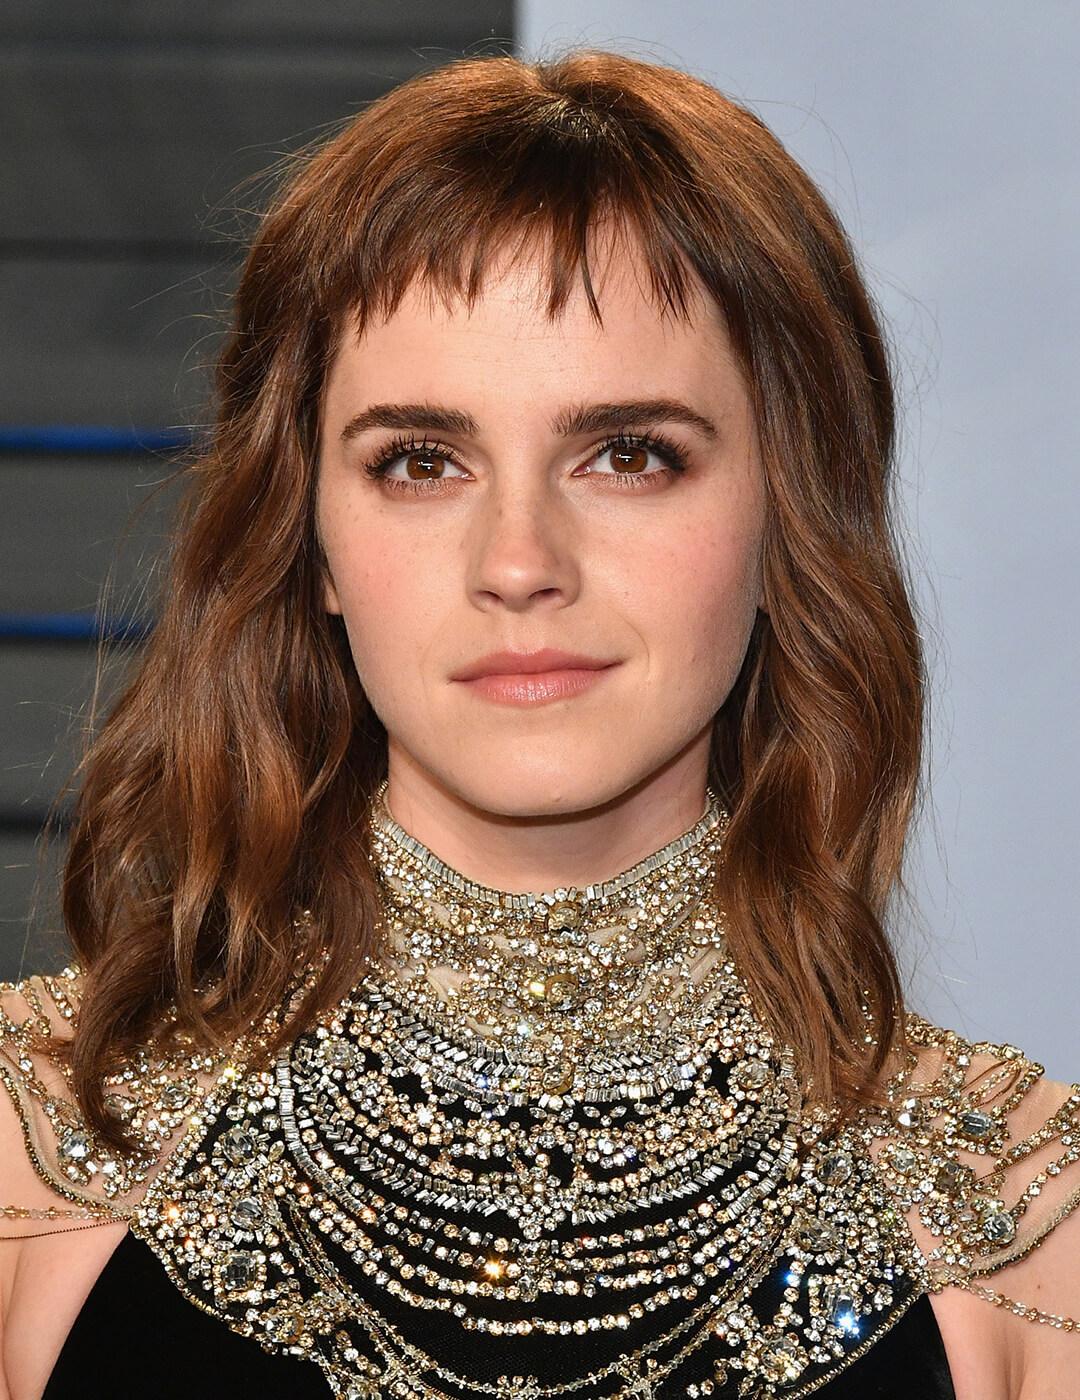 Emma Watson rocking beach waves with micro bangs hairstyle and neutral makeup look